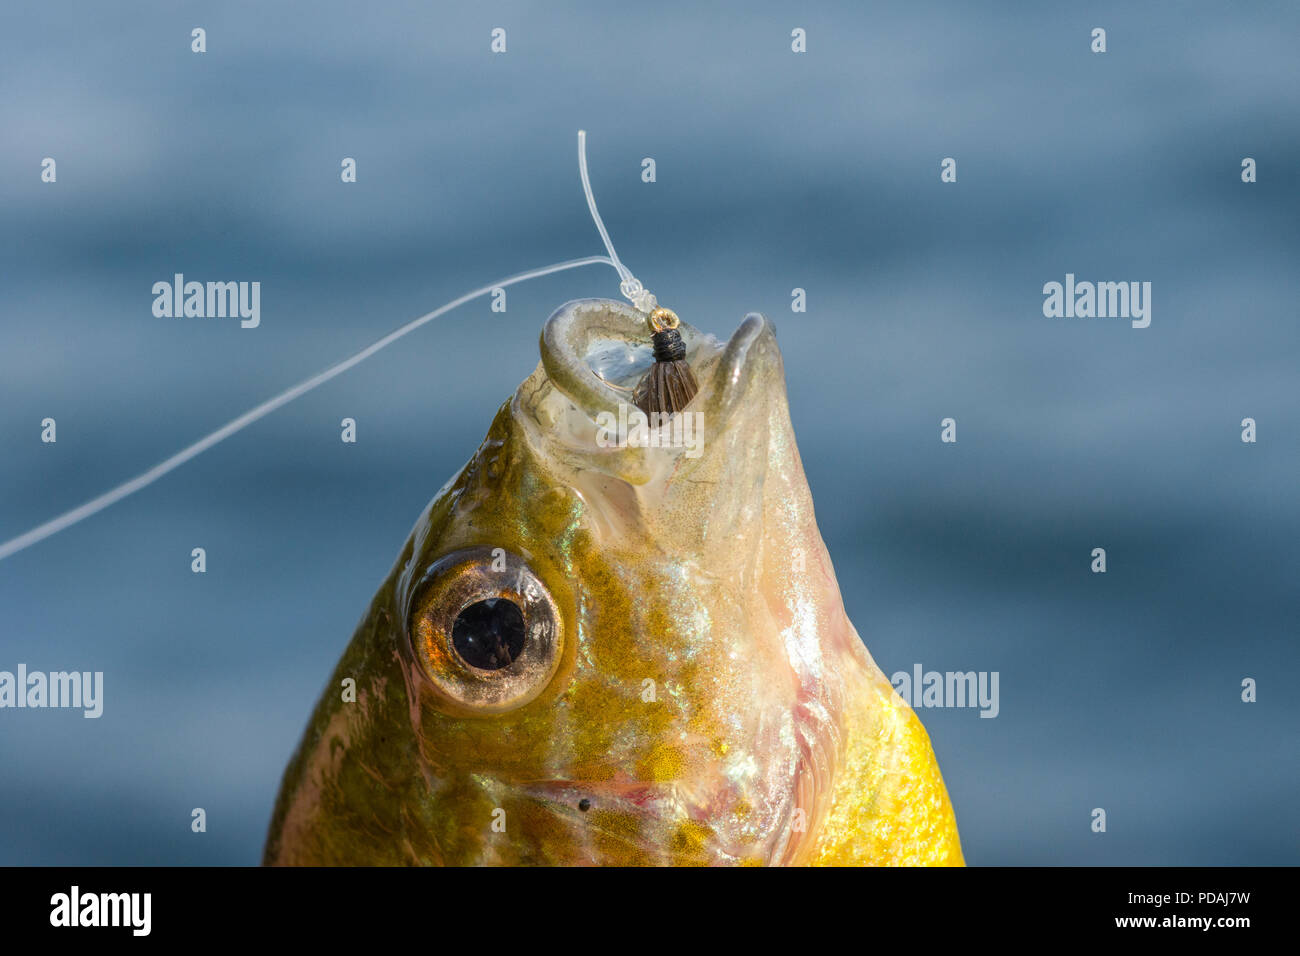 A pumpkinseed (Lepomis gibbosus) caught fishing with a fly. Stock Photo